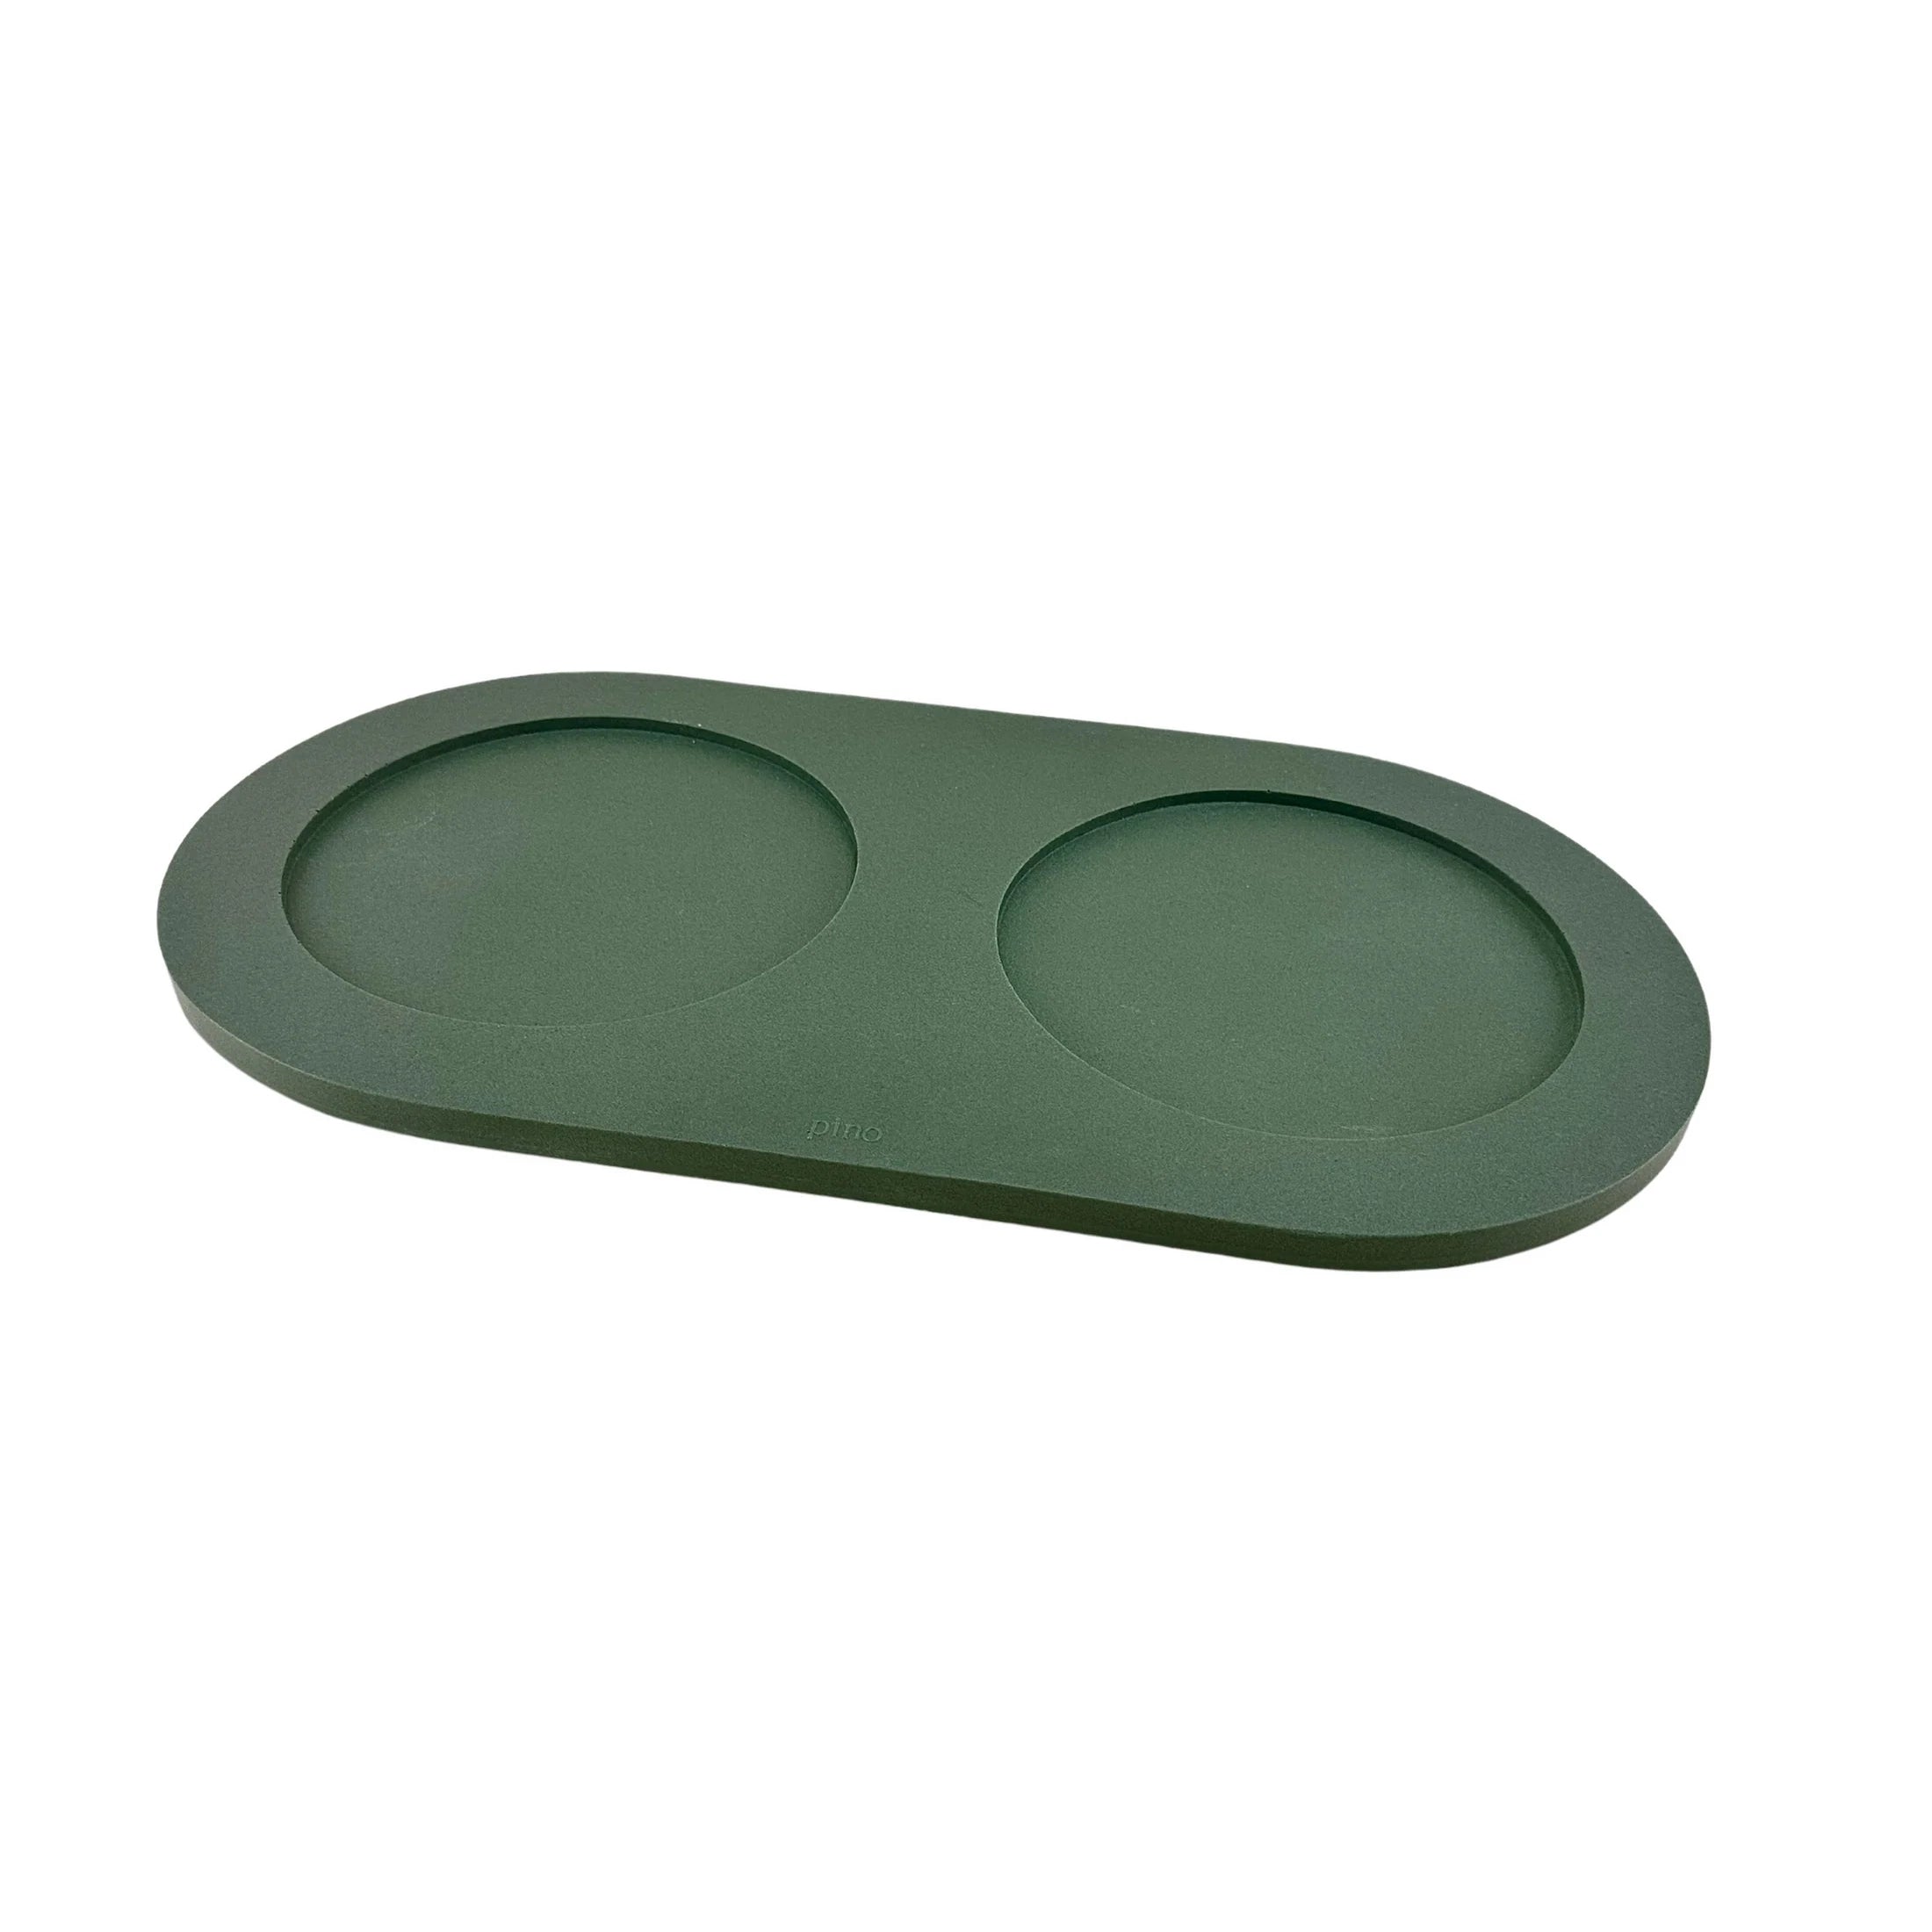 Serving Tray - Duck Green